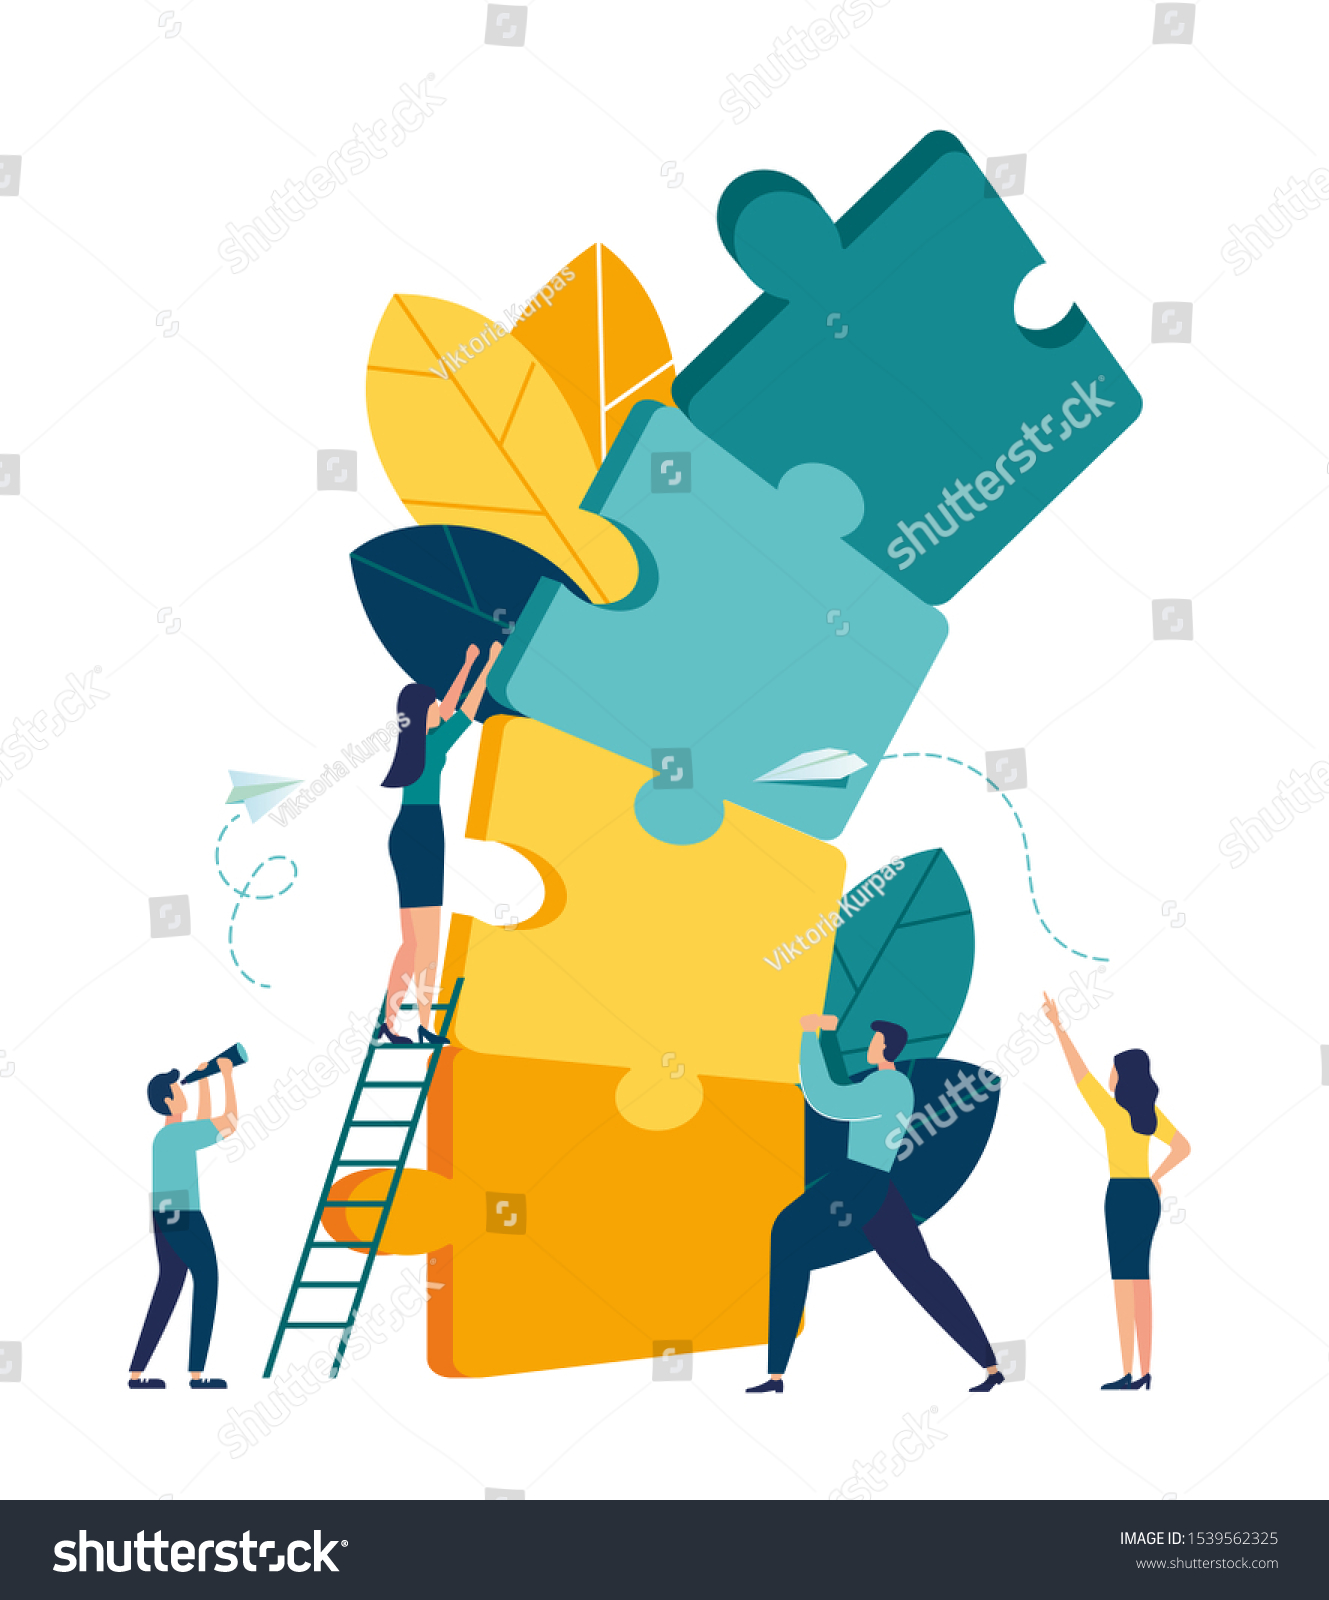 Business concept. Team metaphor. people connecting elements of a falling tower tower puzzle. Vector illustration of a flat design style. #1539562325